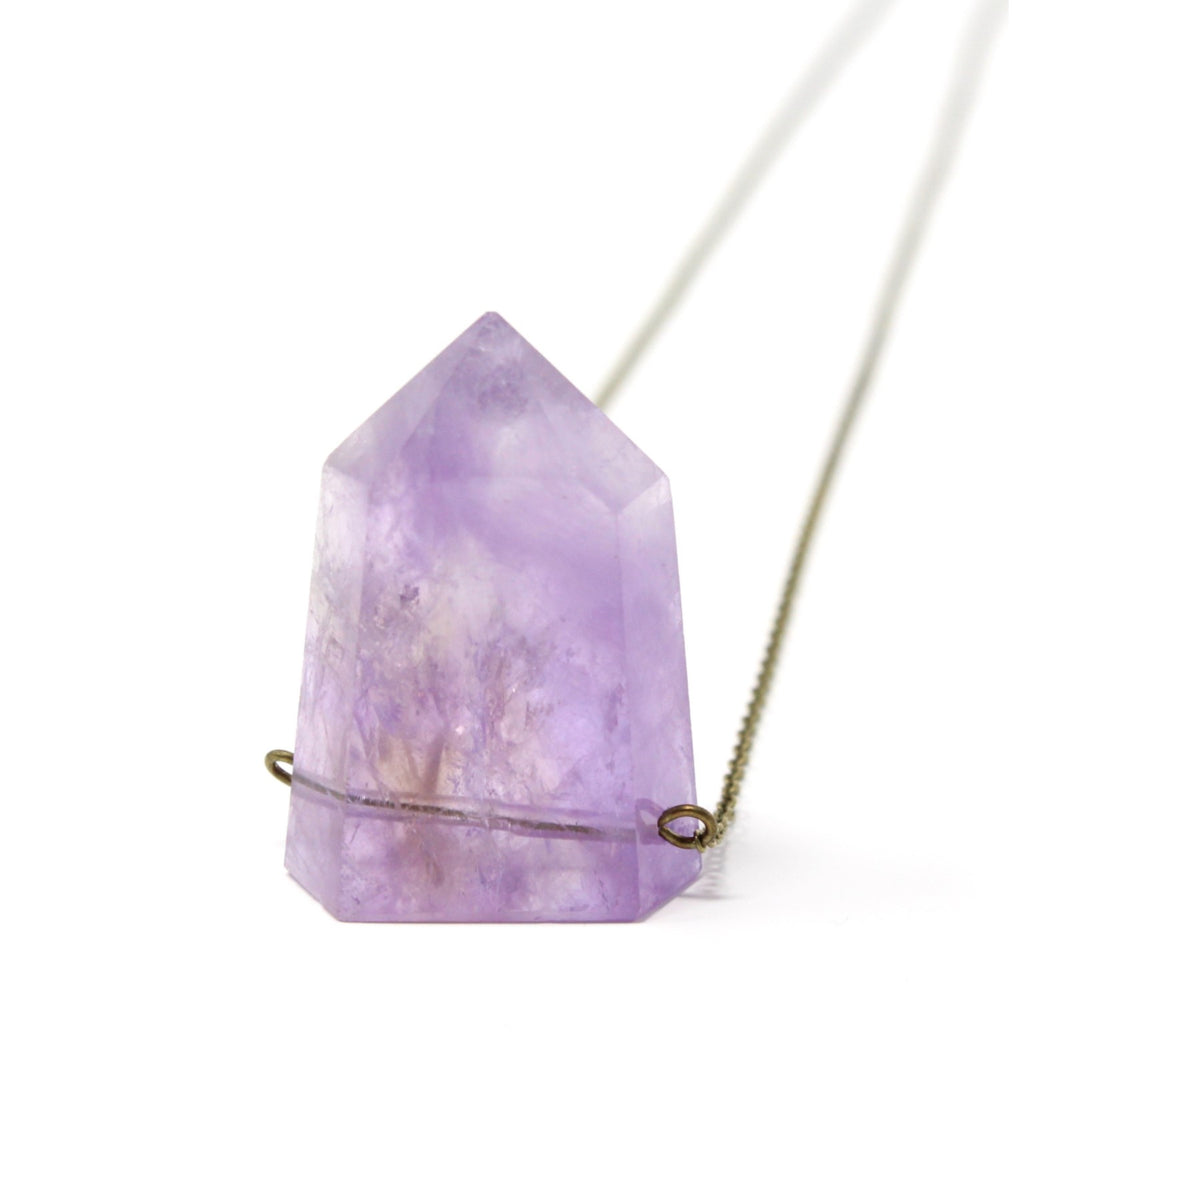 Hive Necklace - XL Amethyst